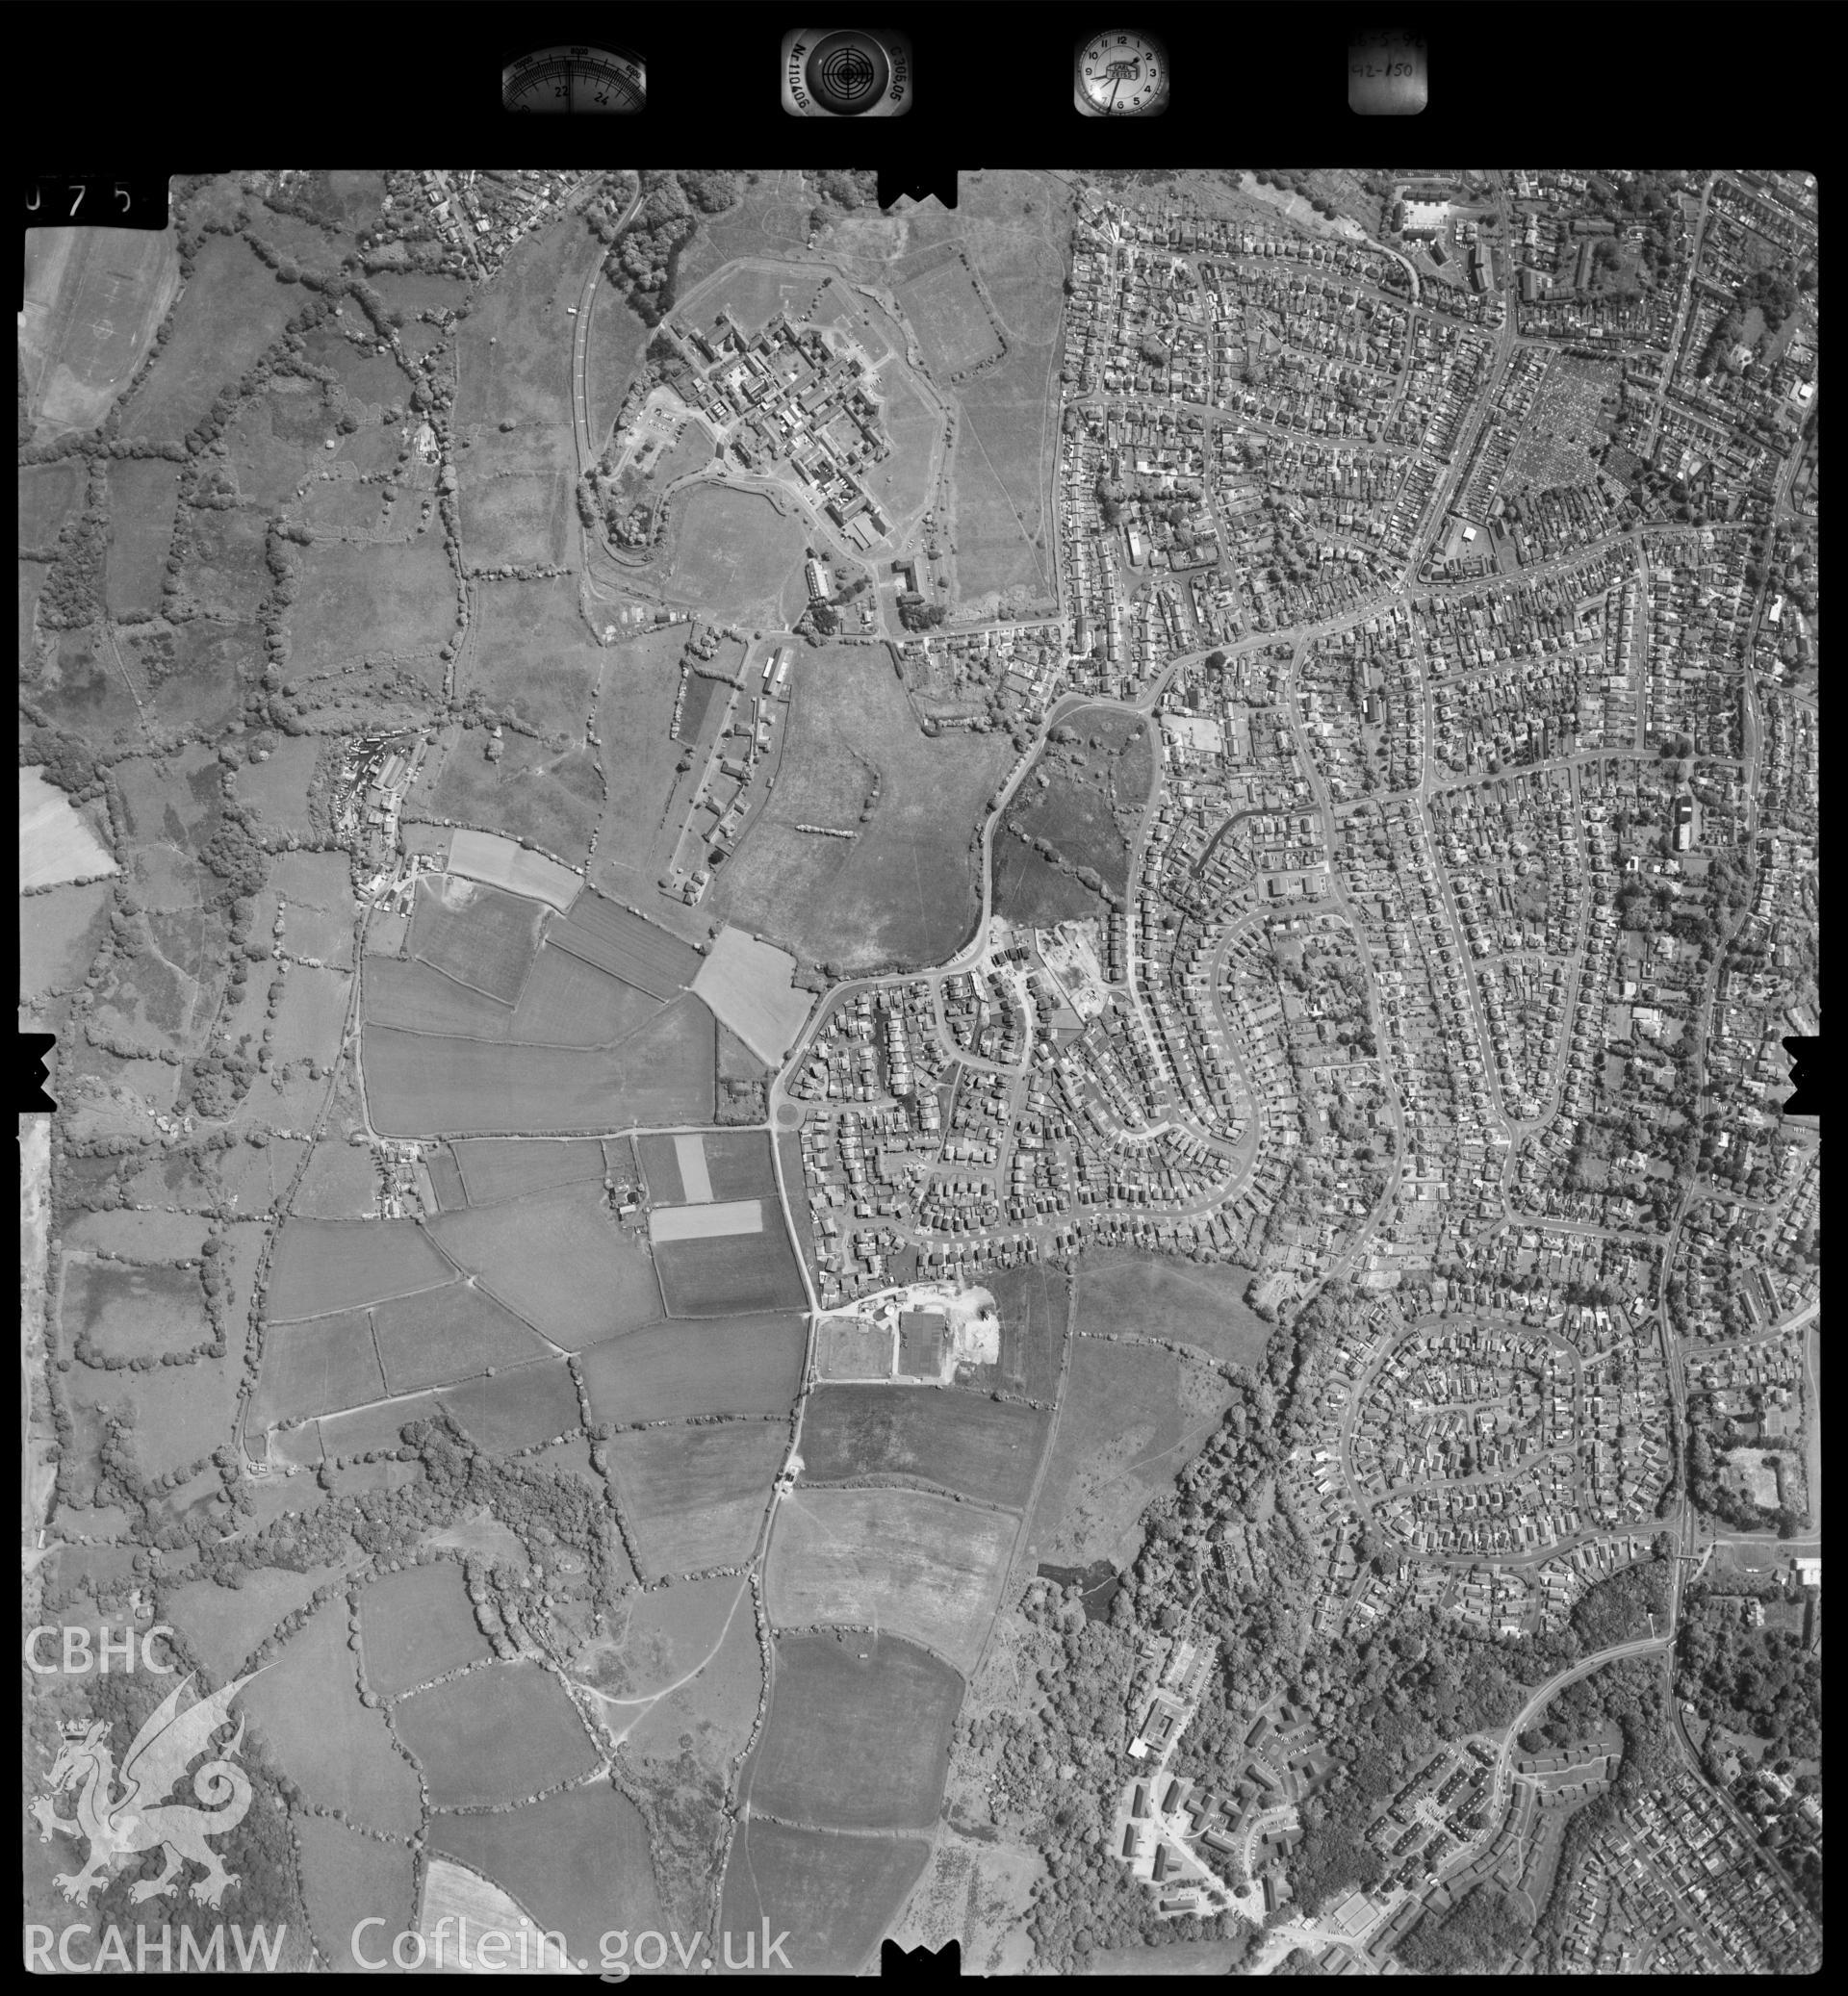 Digitized copy of an aerial photograph showing the Carnglas area, taken by Ordnance Survey, 1992.